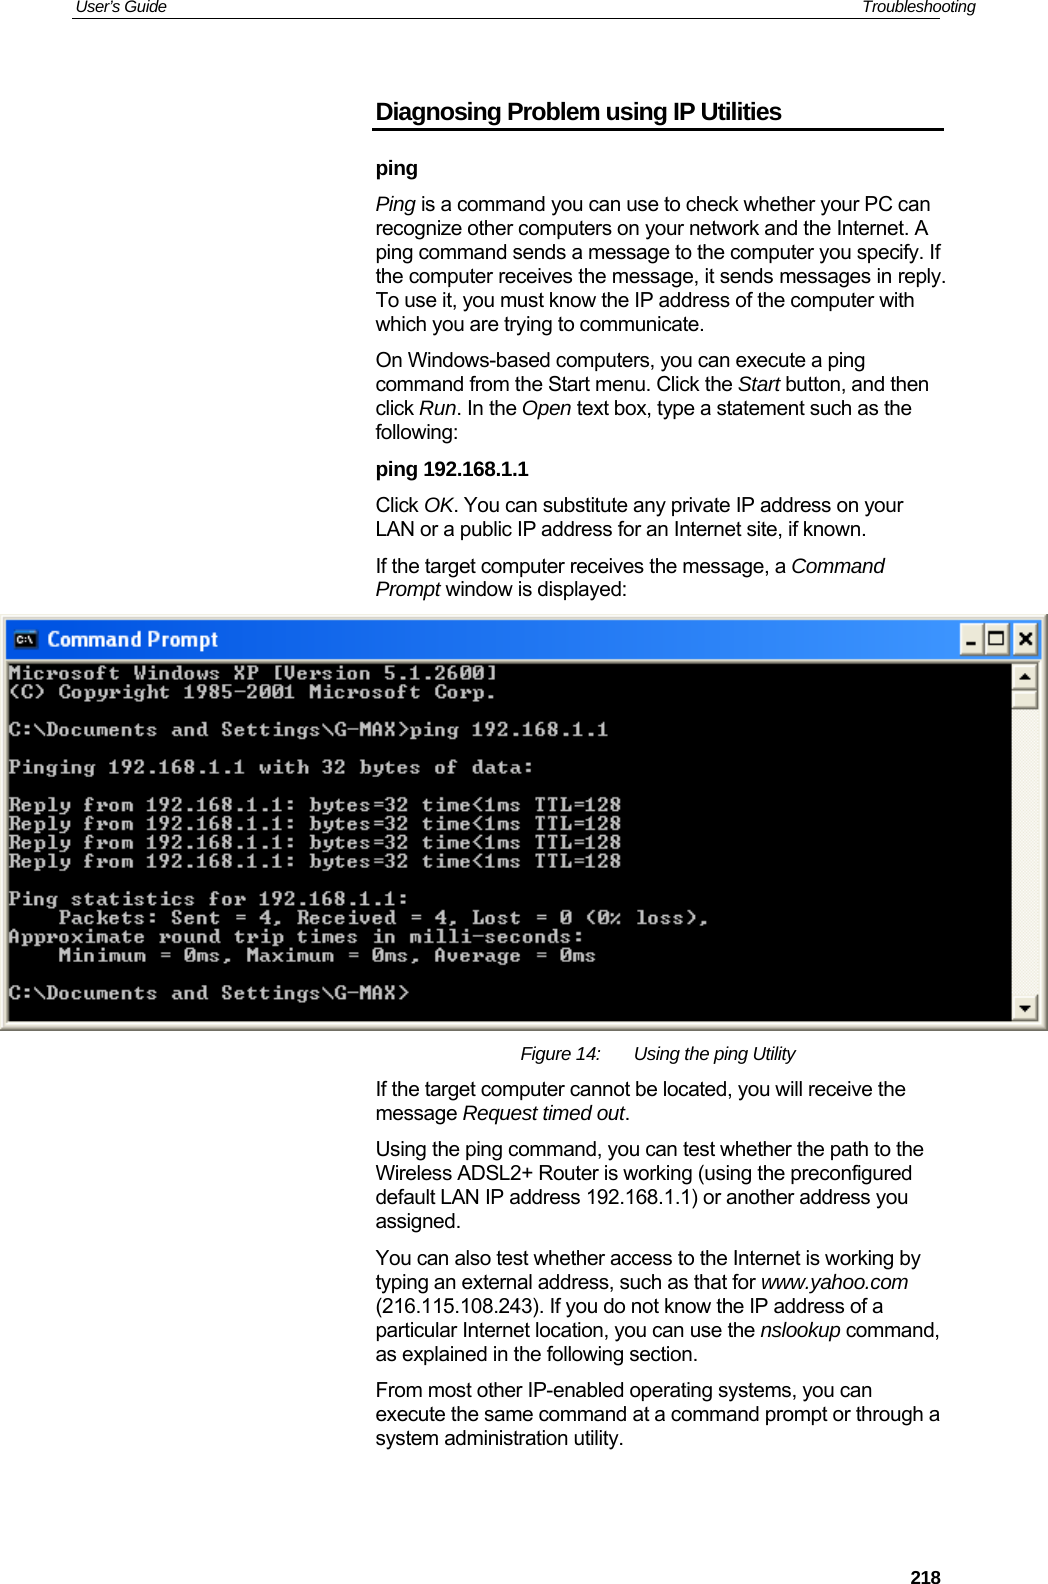 User’s Guide   Troubleshooting  218Diagnosing Problem using IP Utilities ping Ping is a command you can use to check whether your PC can recognize other computers on your network and the Internet. A ping command sends a message to the computer you specify. If the computer receives the message, it sends messages in reply. To use it, you must know the IP address of the computer with which you are trying to communicate.  On Windows-based computers, you can execute a ping command from the Start menu. Click the Start button, and then click Run. In the Open text box, type a statement such as the following: ping 192.168.1.1 Click OK. You can substitute any private IP address on your LAN or a public IP address for an Internet site, if known.  If the target computer receives the message, a Command Prompt window is displayed:  Figure 14:  Using the ping Utility If the target computer cannot be located, you will receive the message Request timed out. Using the ping command, you can test whether the path to the Wireless ADSL2+ Router is working (using the preconfigured default LAN IP address 192.168.1.1) or another address you assigned. You can also test whether access to the Internet is working by typing an external address, such as that for www.yahoo.com (216.115.108.243). If you do not know the IP address of a particular Internet location, you can use the nslookup command, as explained in the following section. From most other IP-enabled operating systems, you can execute the same command at a command prompt or through a system administration utility. 